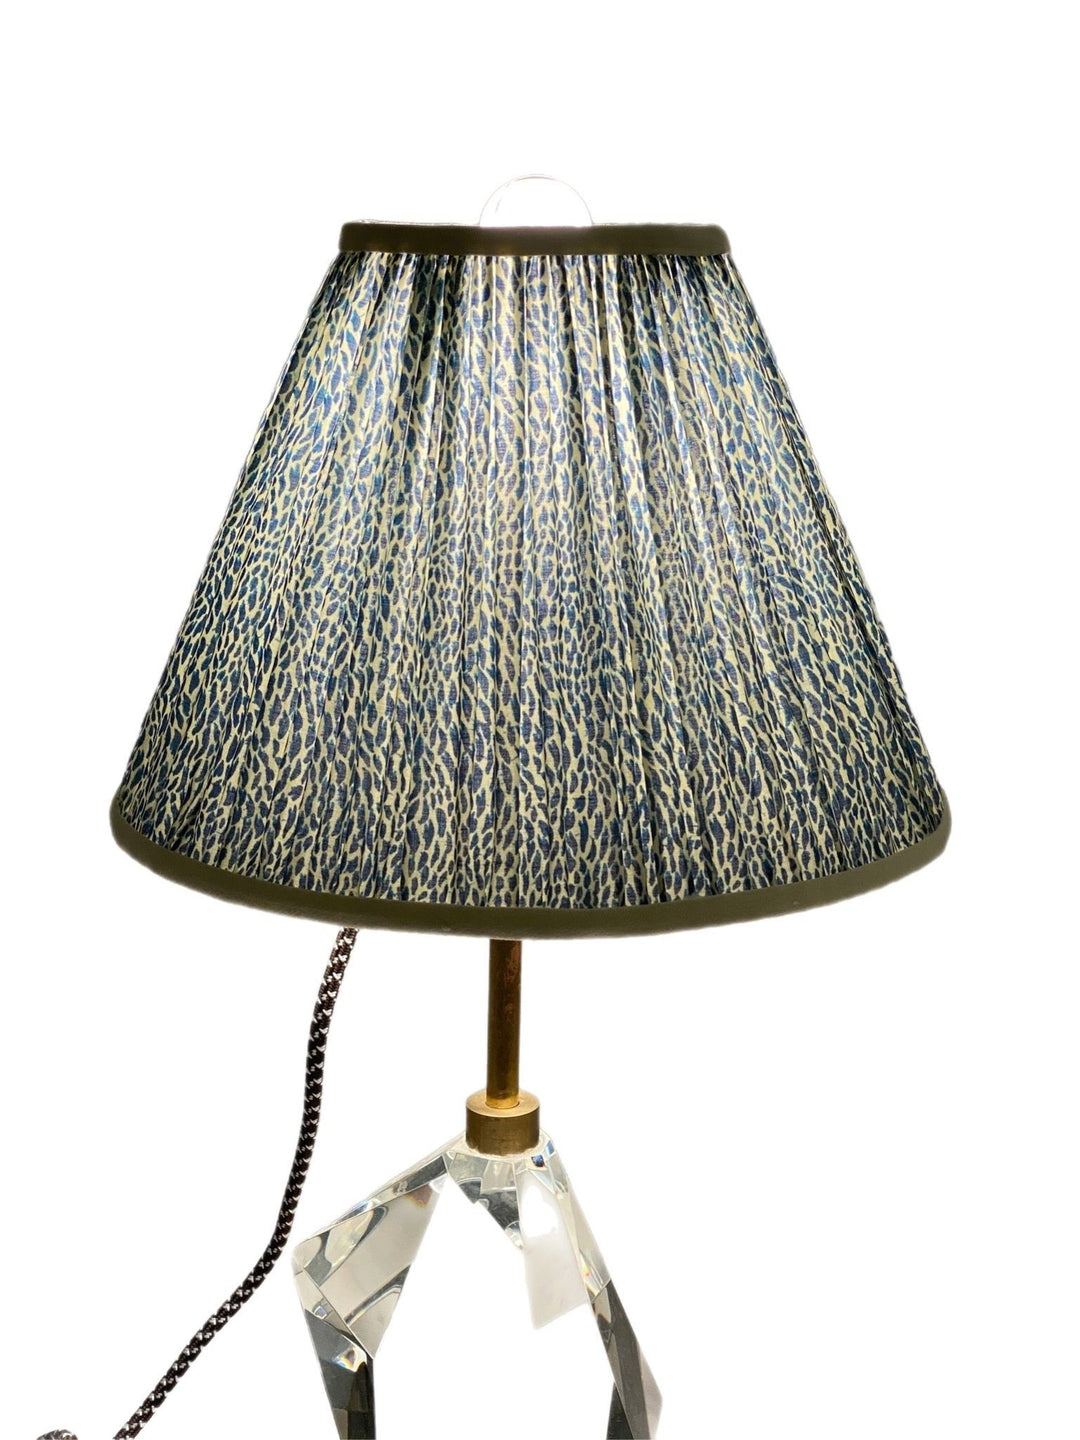 Gathered Shade made with Plumettes by Pierre Frey 12" Base (1) in stock - Lux Lamp Shades